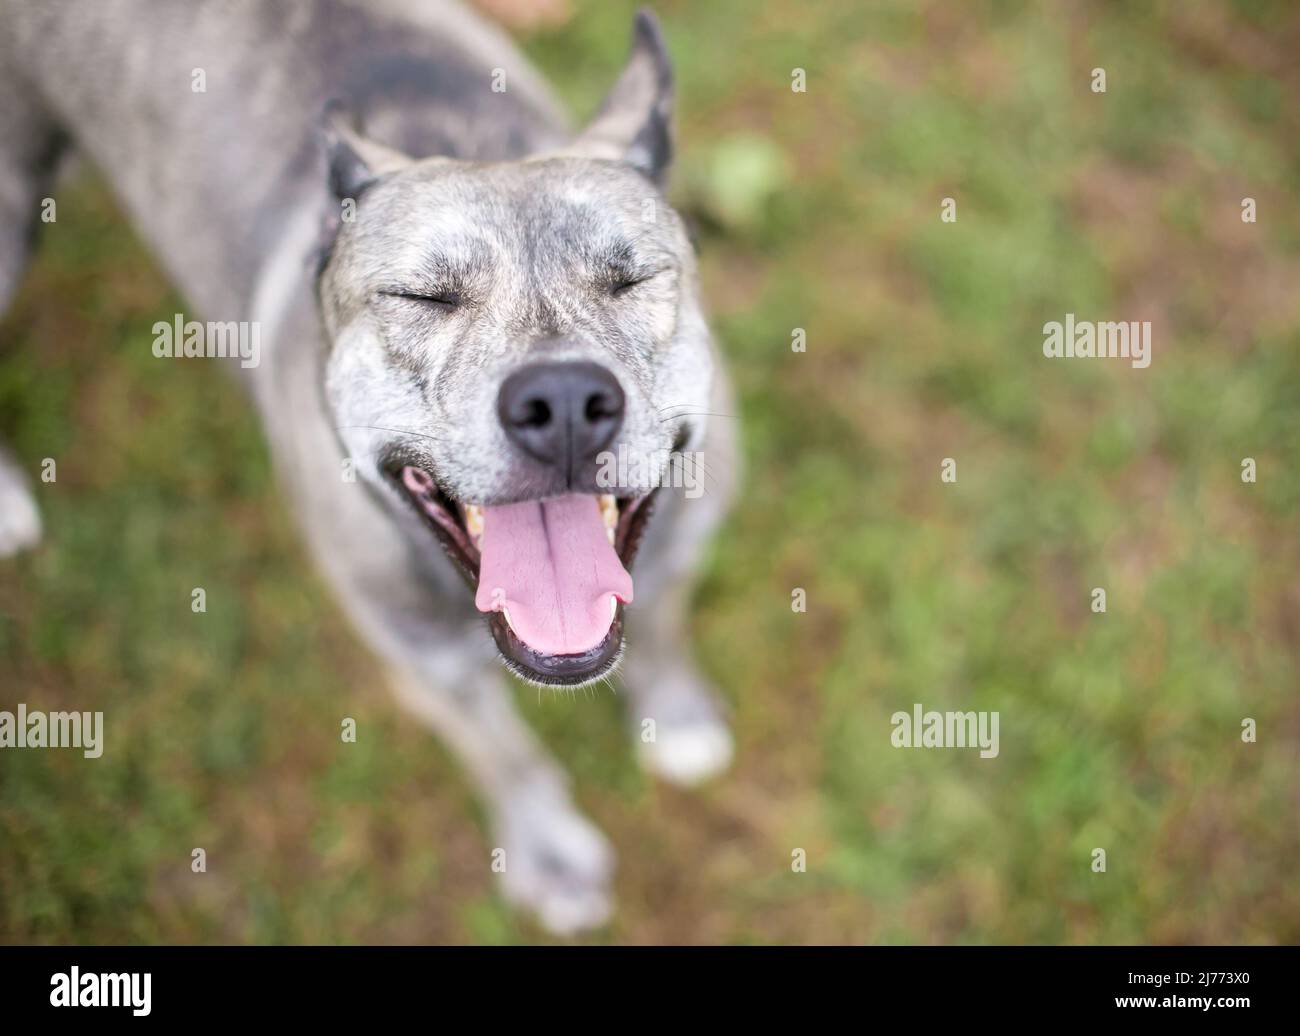 A mixed breed dog with its eyes closed and a happy smiling expression Stock Photo